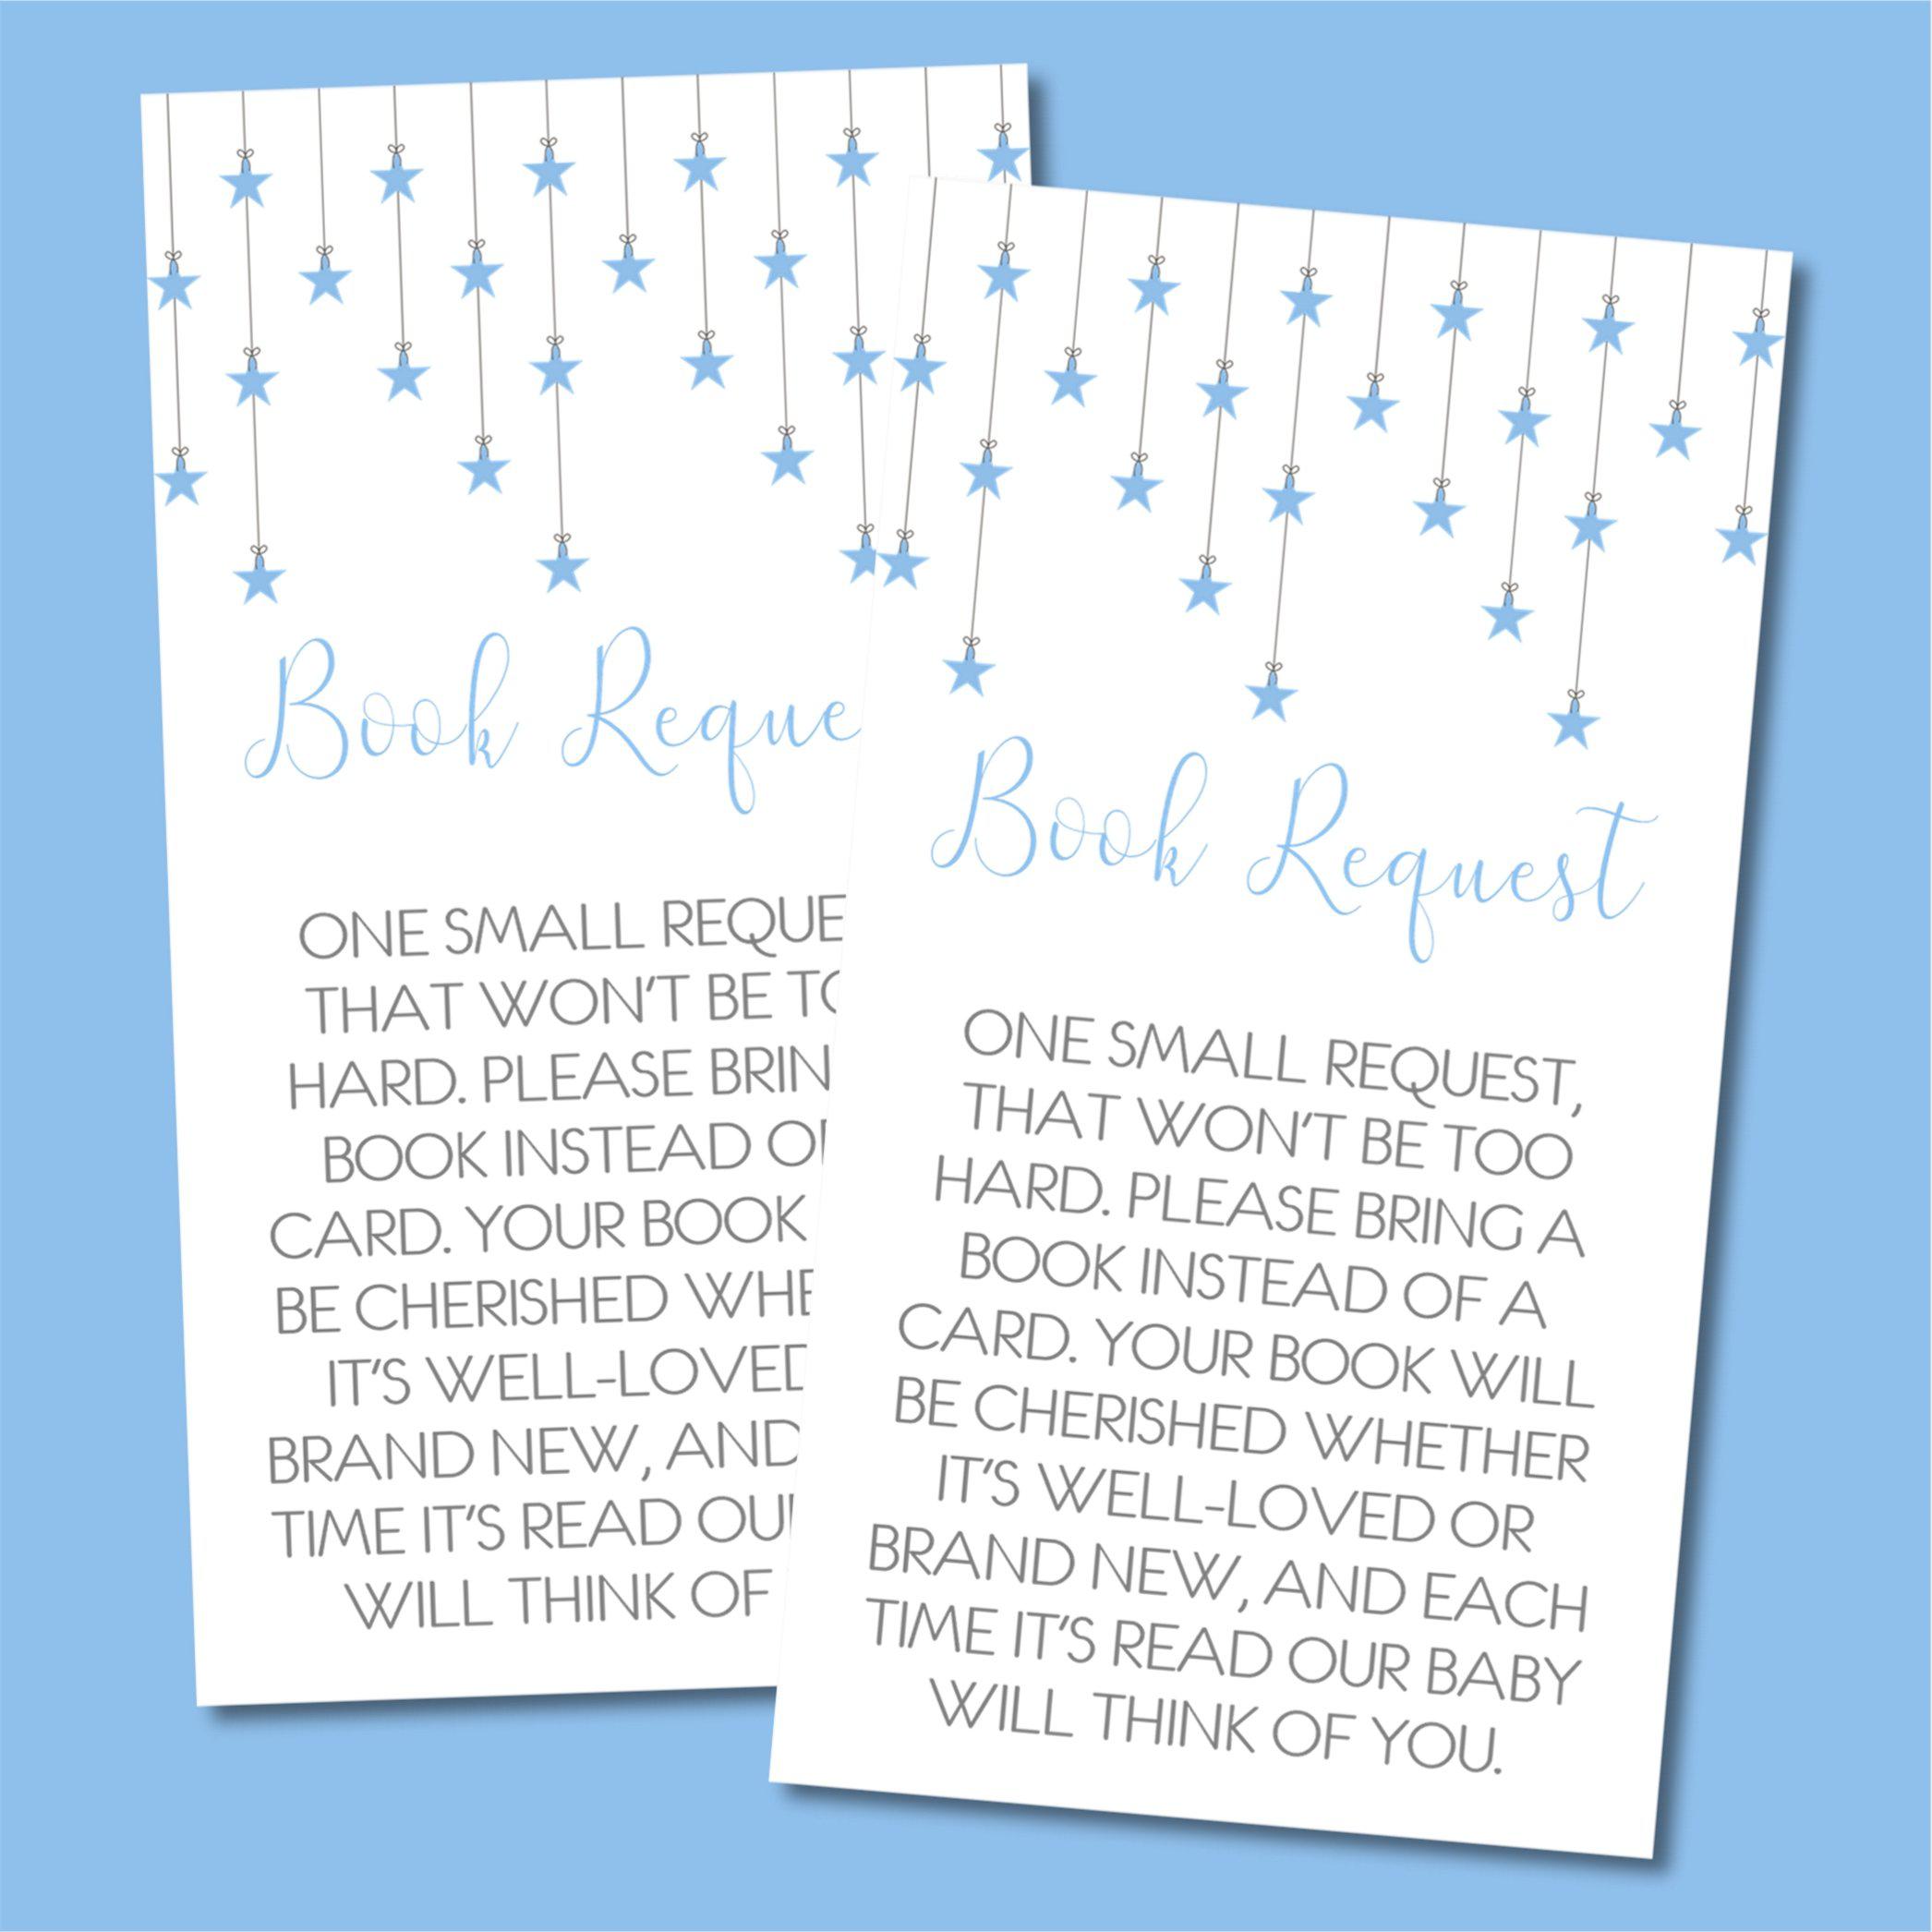 Blue Little Star Book Request Cards